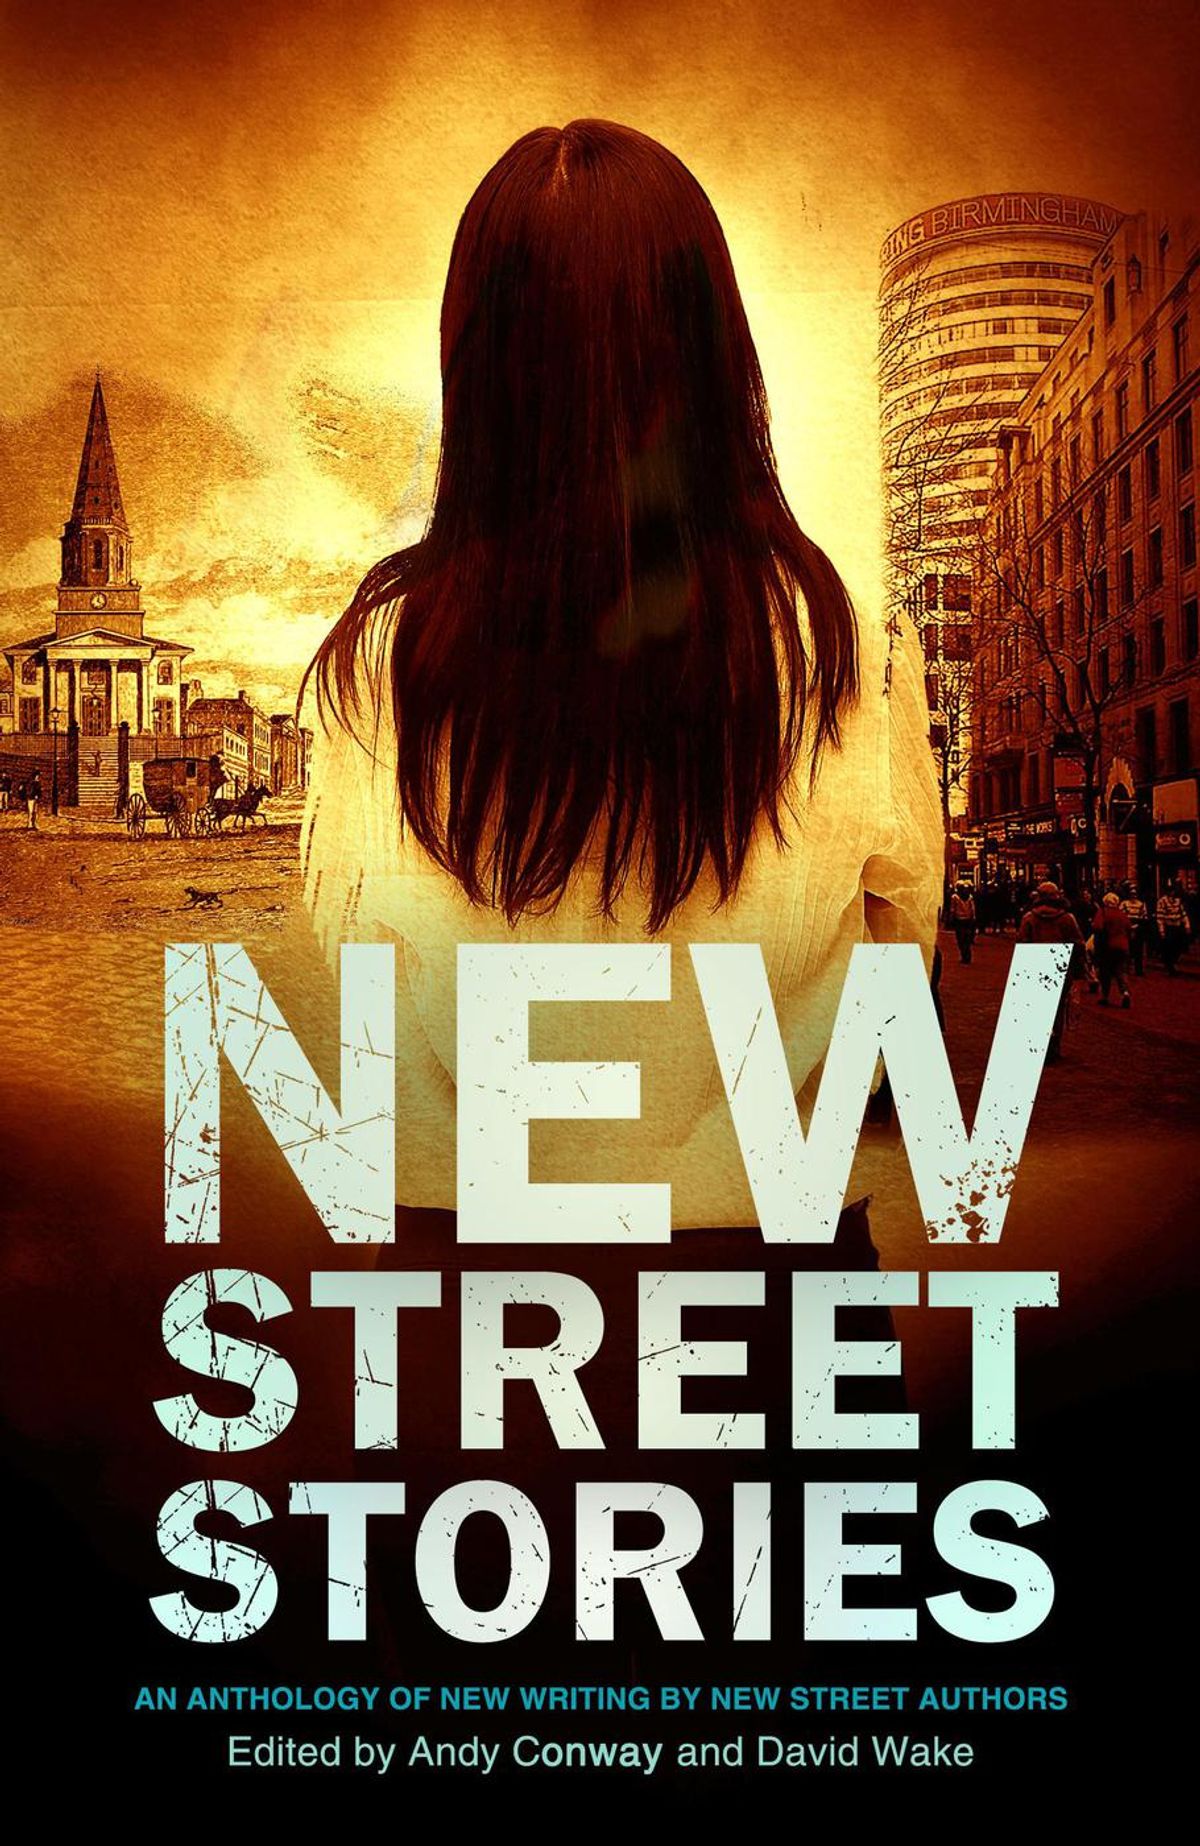 New Street Stories - An Anthology of New Writing by New Street Authors